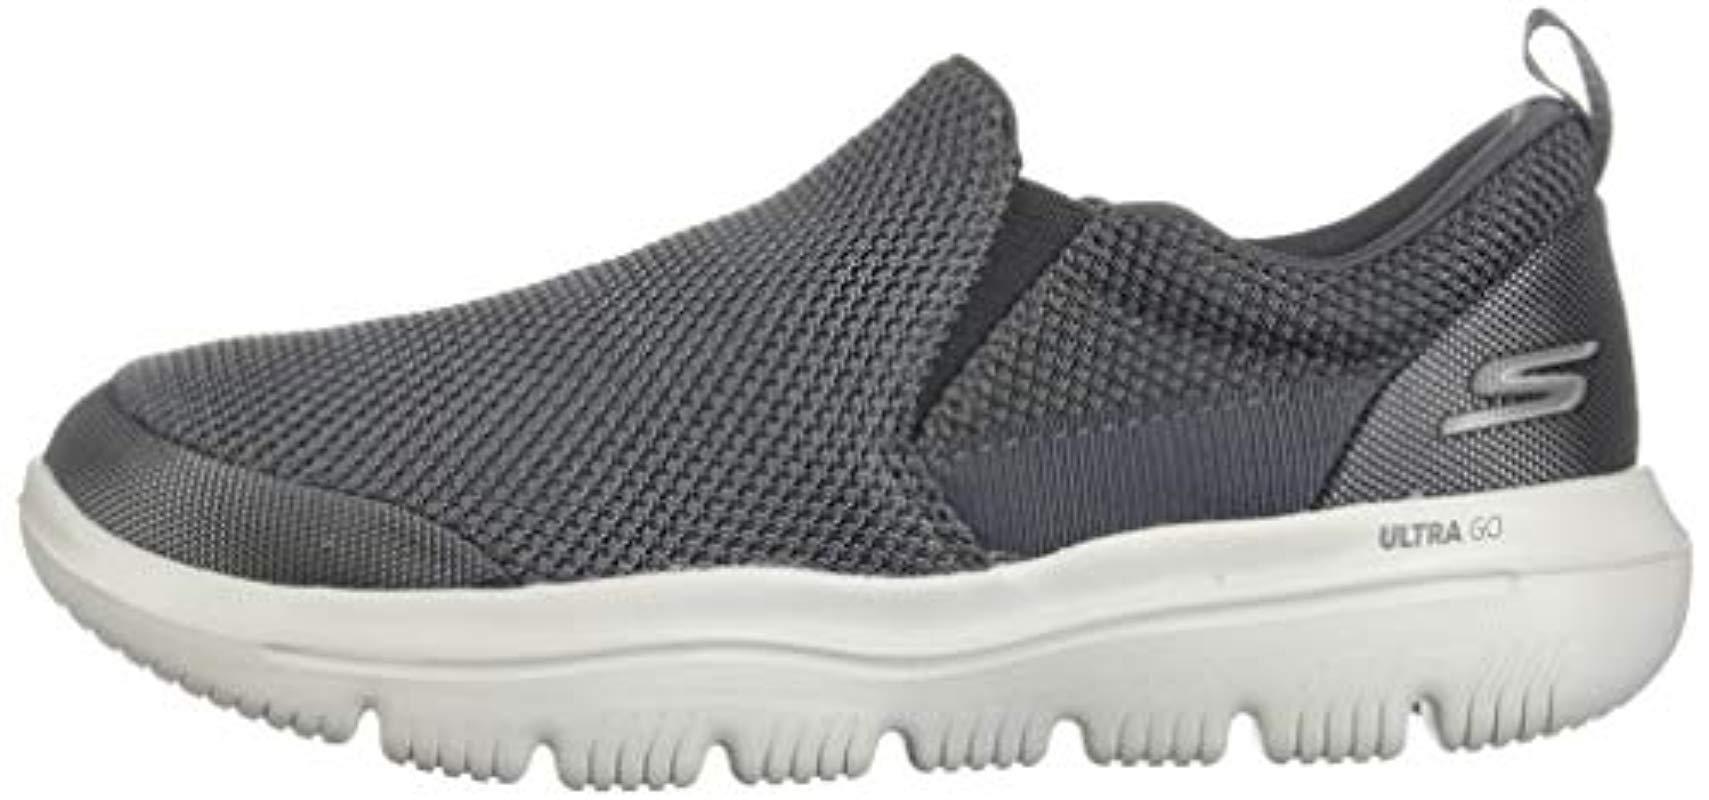 skechers on the go flagship charcoal